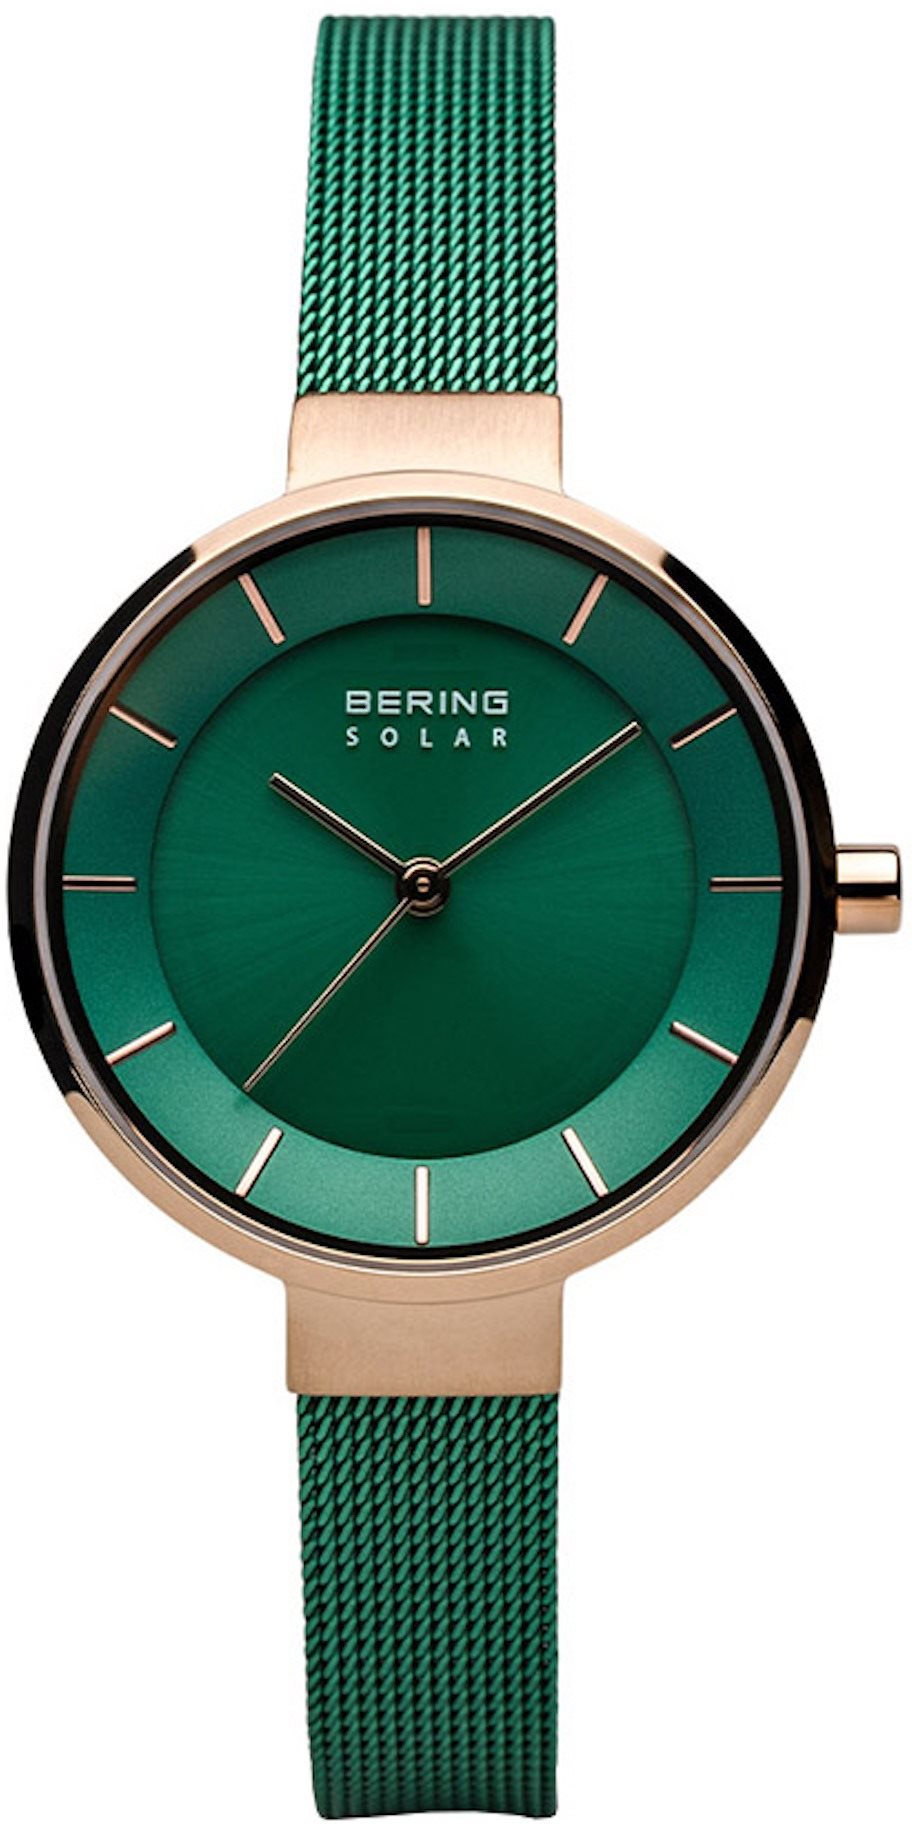 BERING Charity SET - LIMITED EDDITION SOLAR 14631-charity